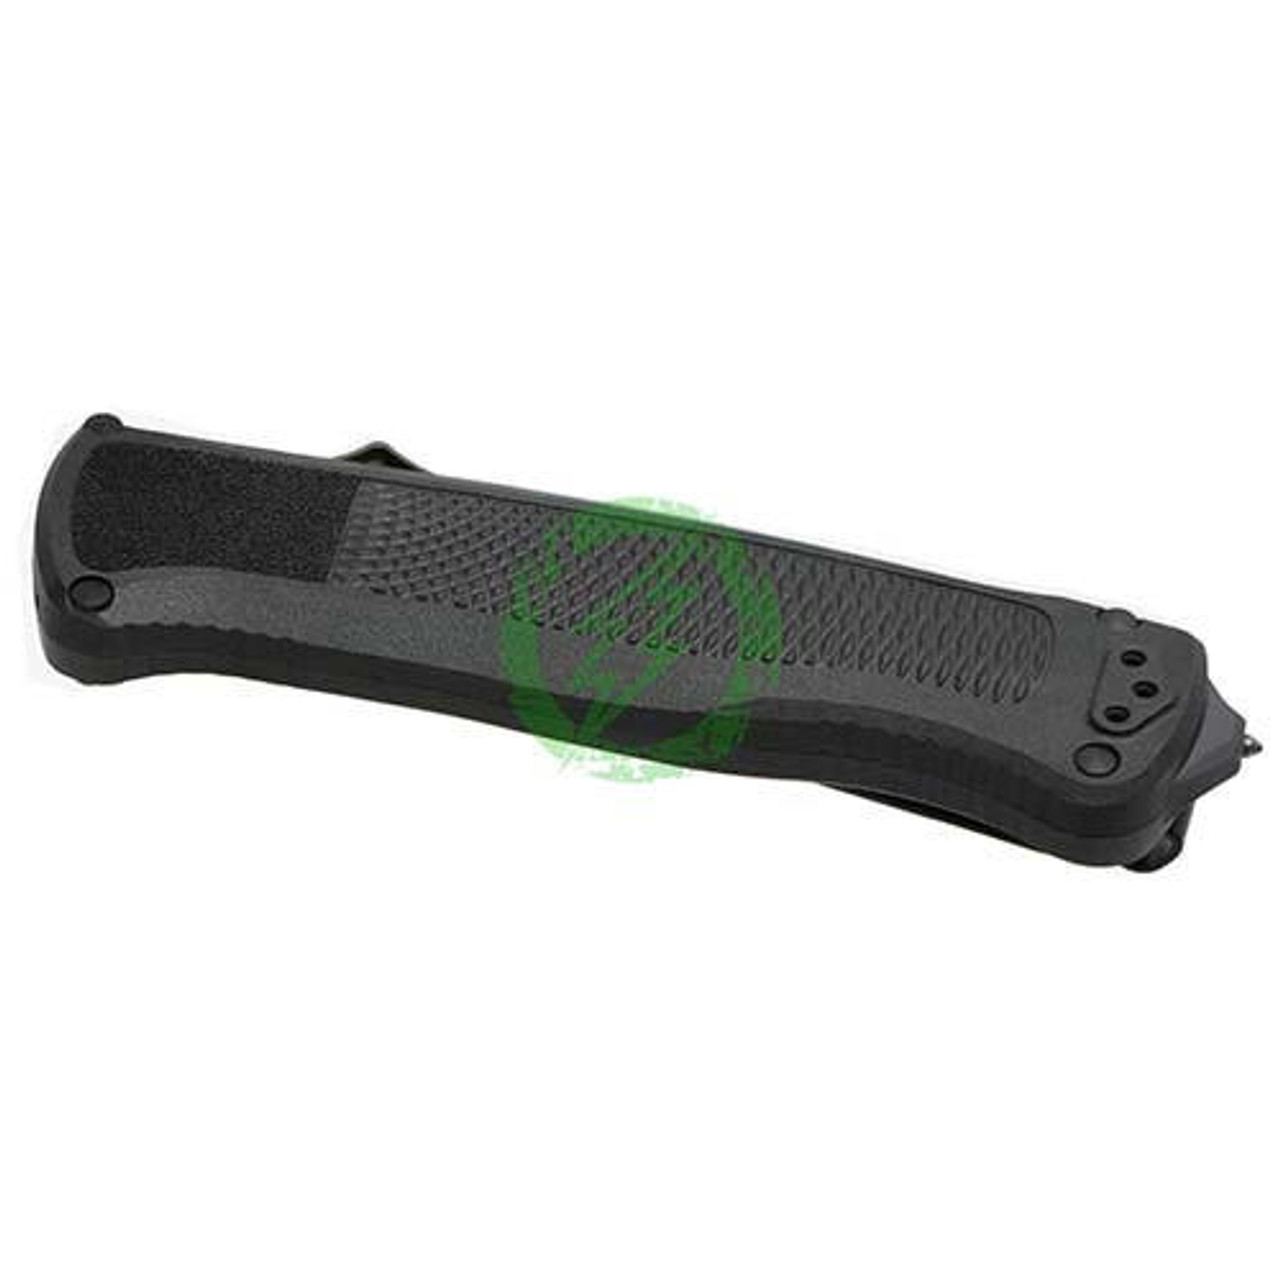  Benchmade Shootout Double-Action Automatic CF-Elite Handles Flat Earth CPM-CruWear Blade 